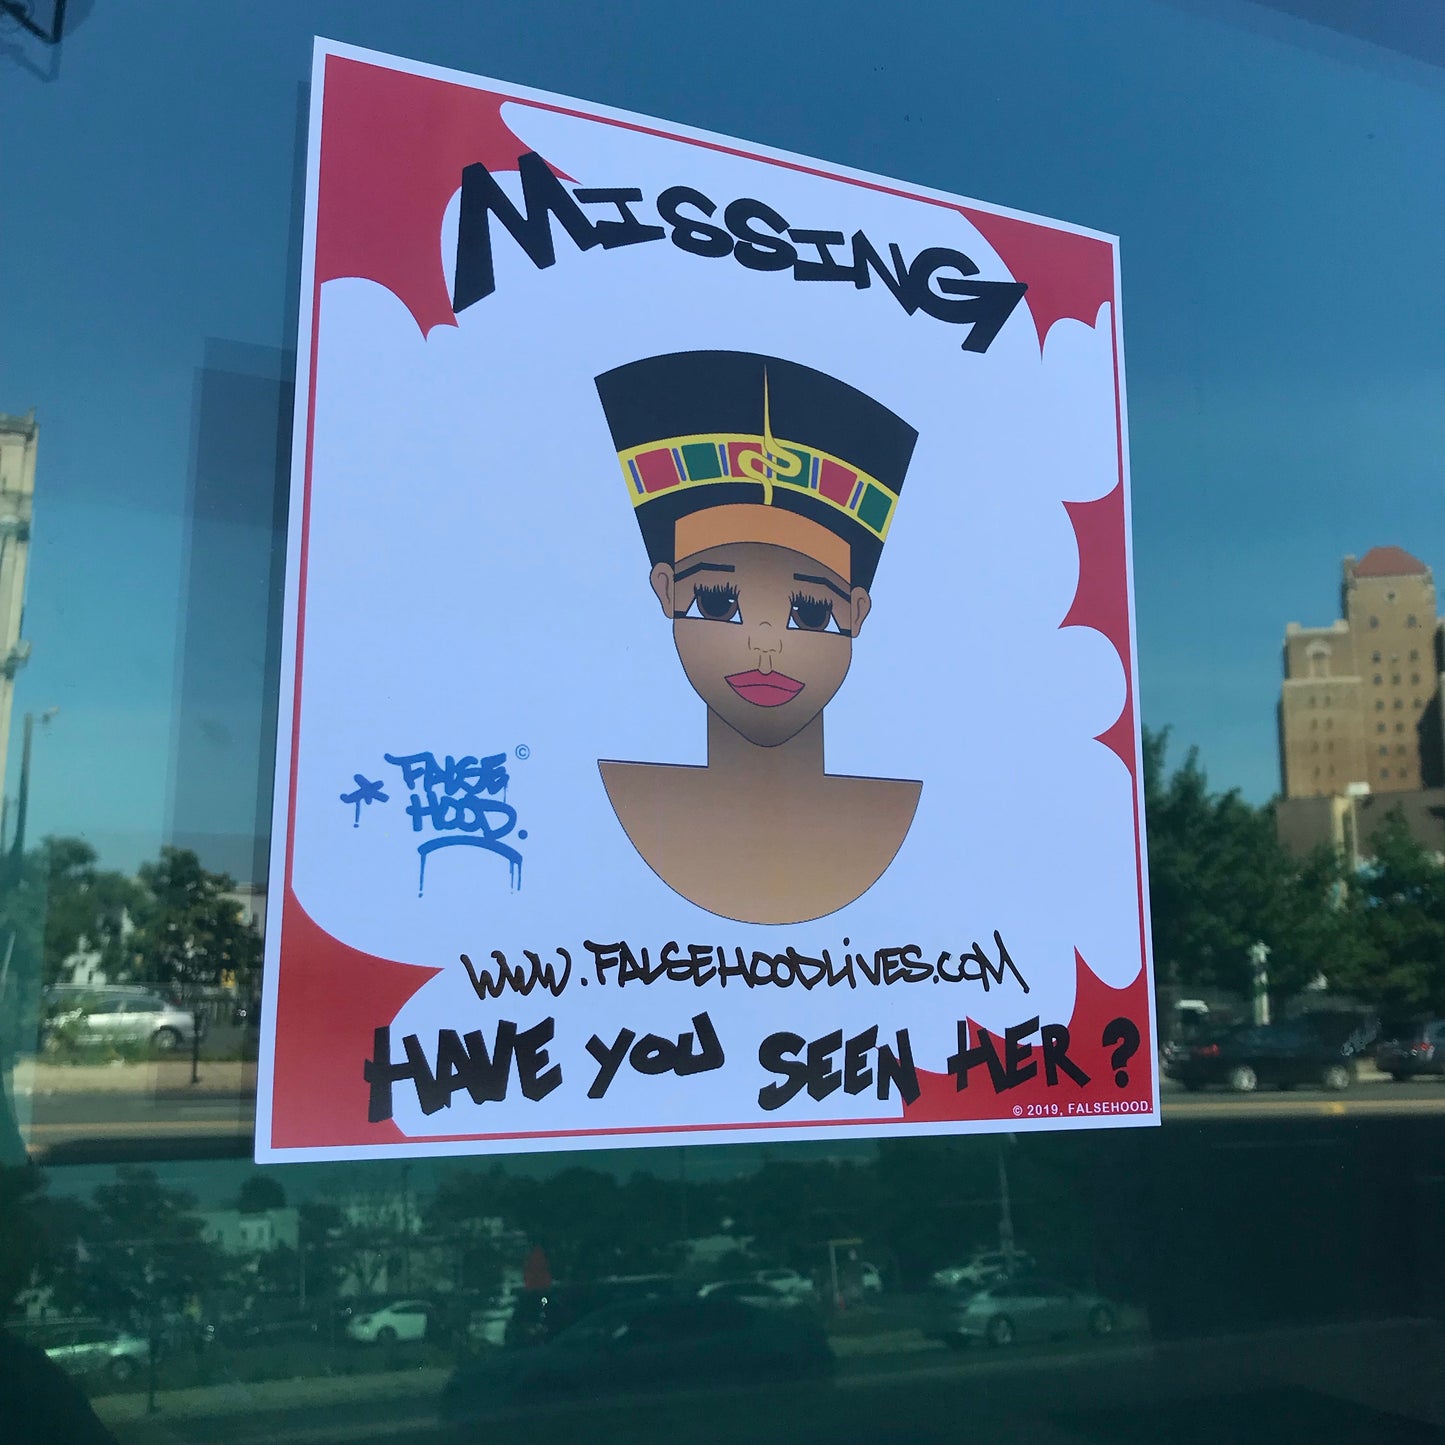 MISSING. Have You Seen Her?